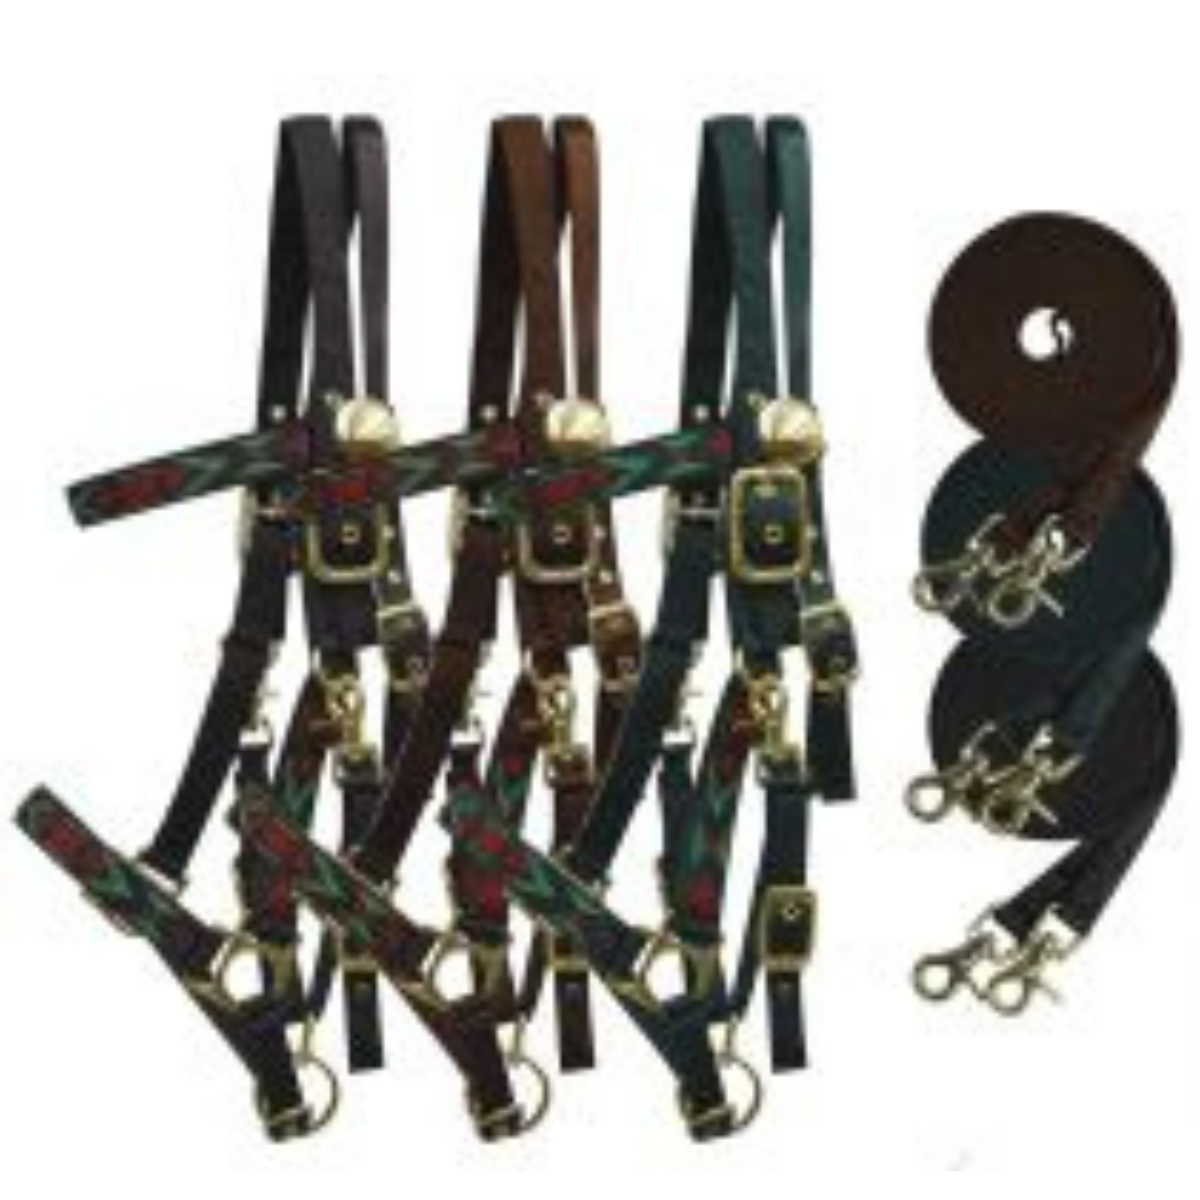  nylon halter bridle combination with reins